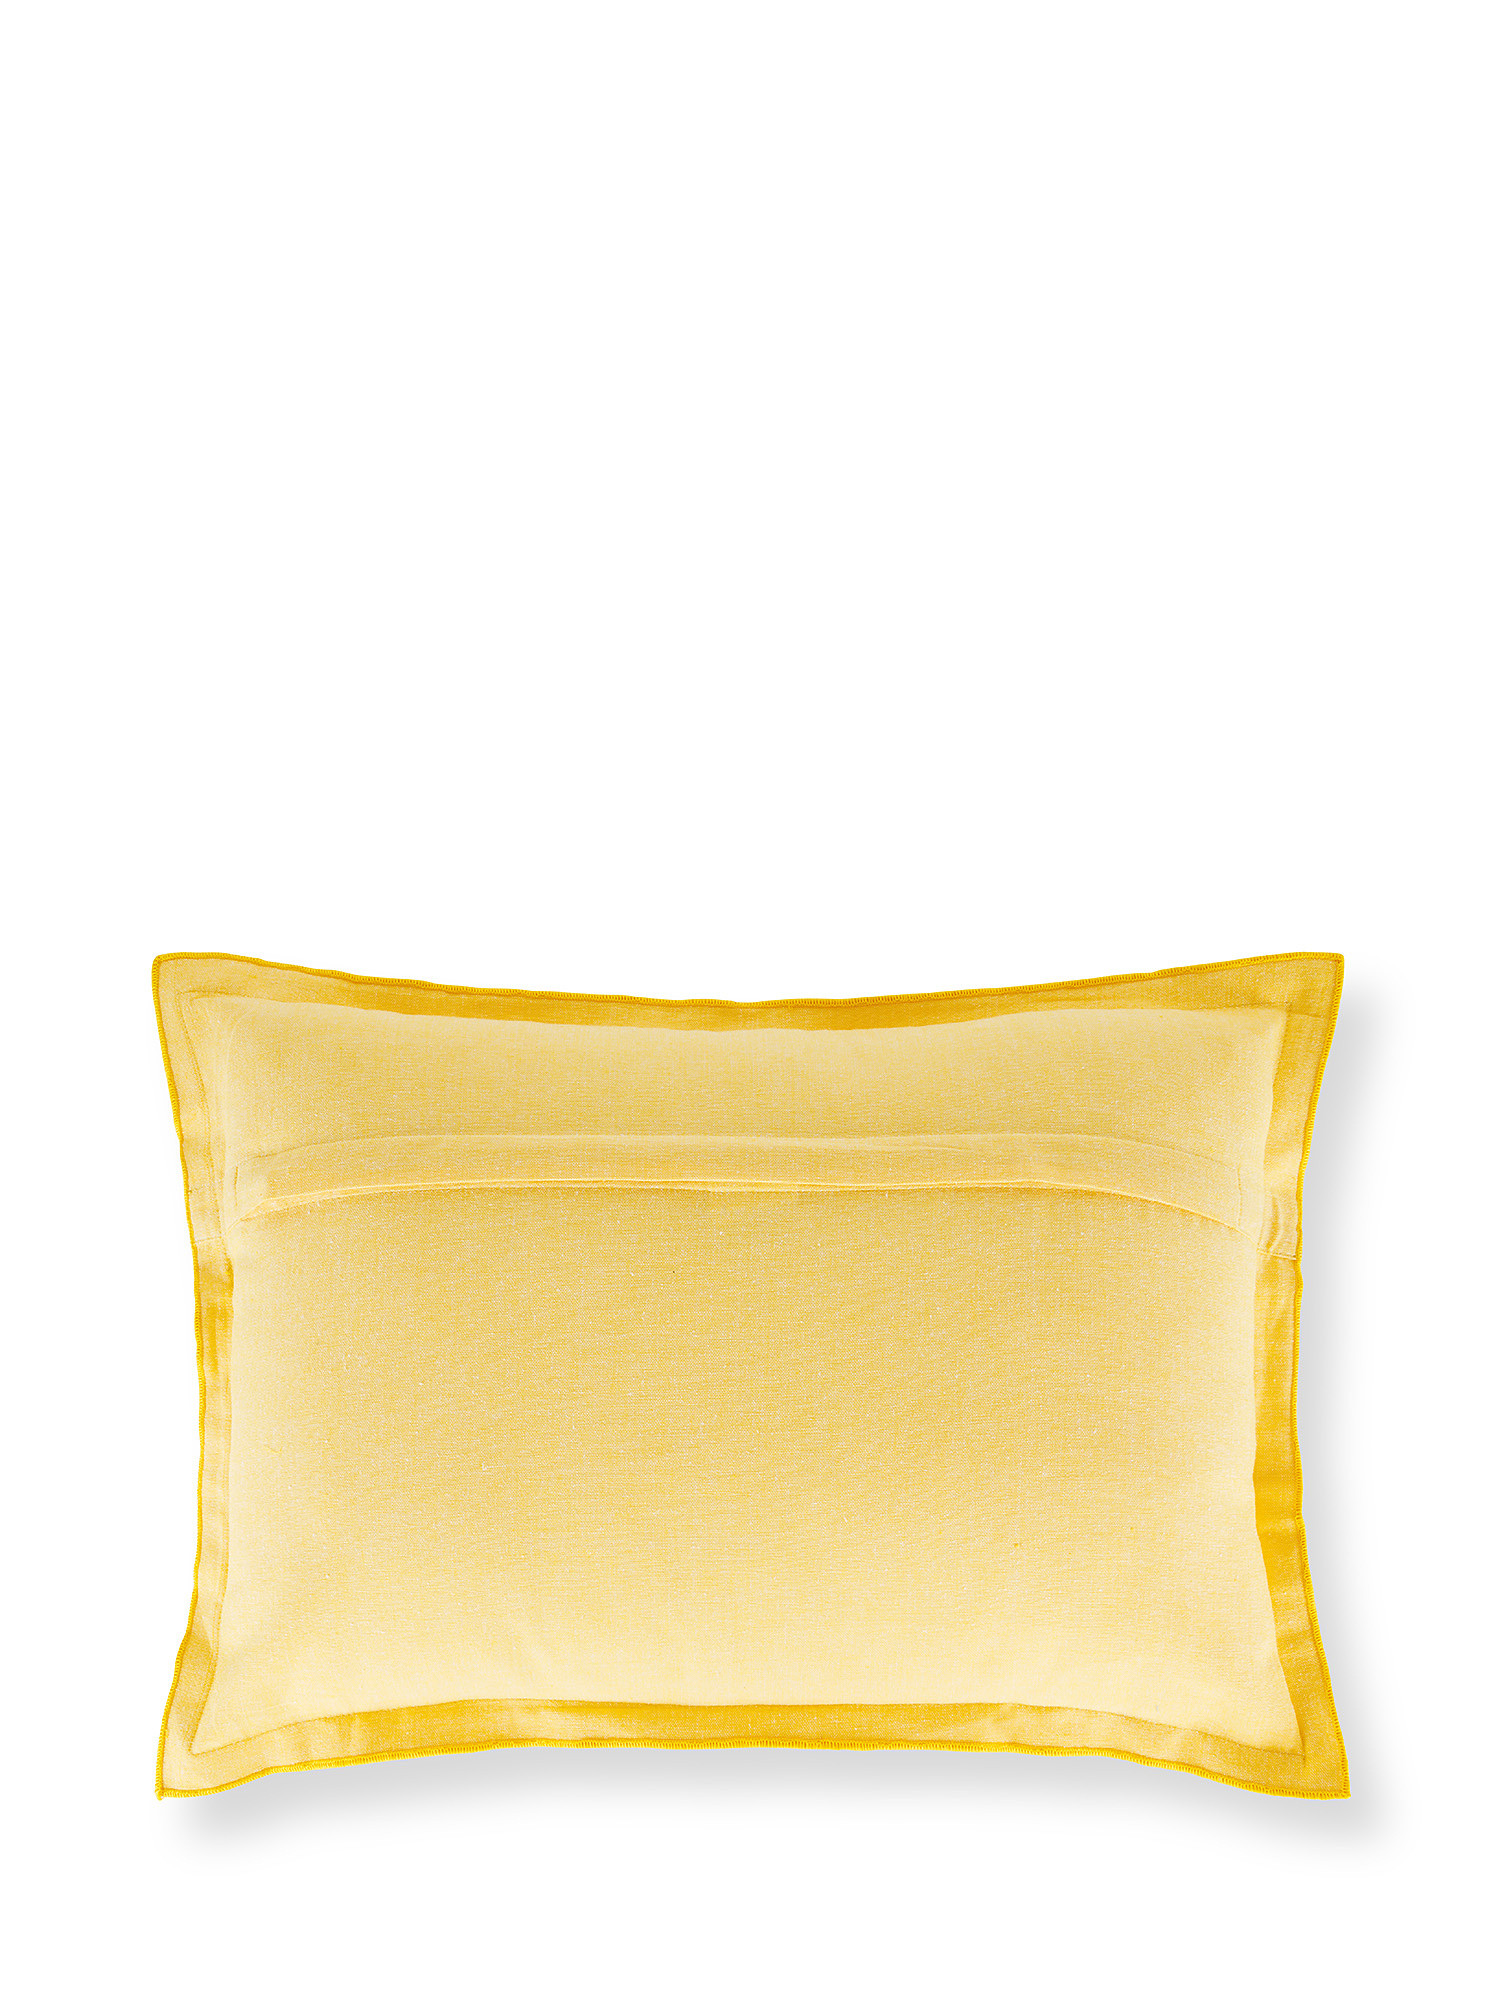 Solid color cotton cushion 45x45cm, Yellow, large image number 1